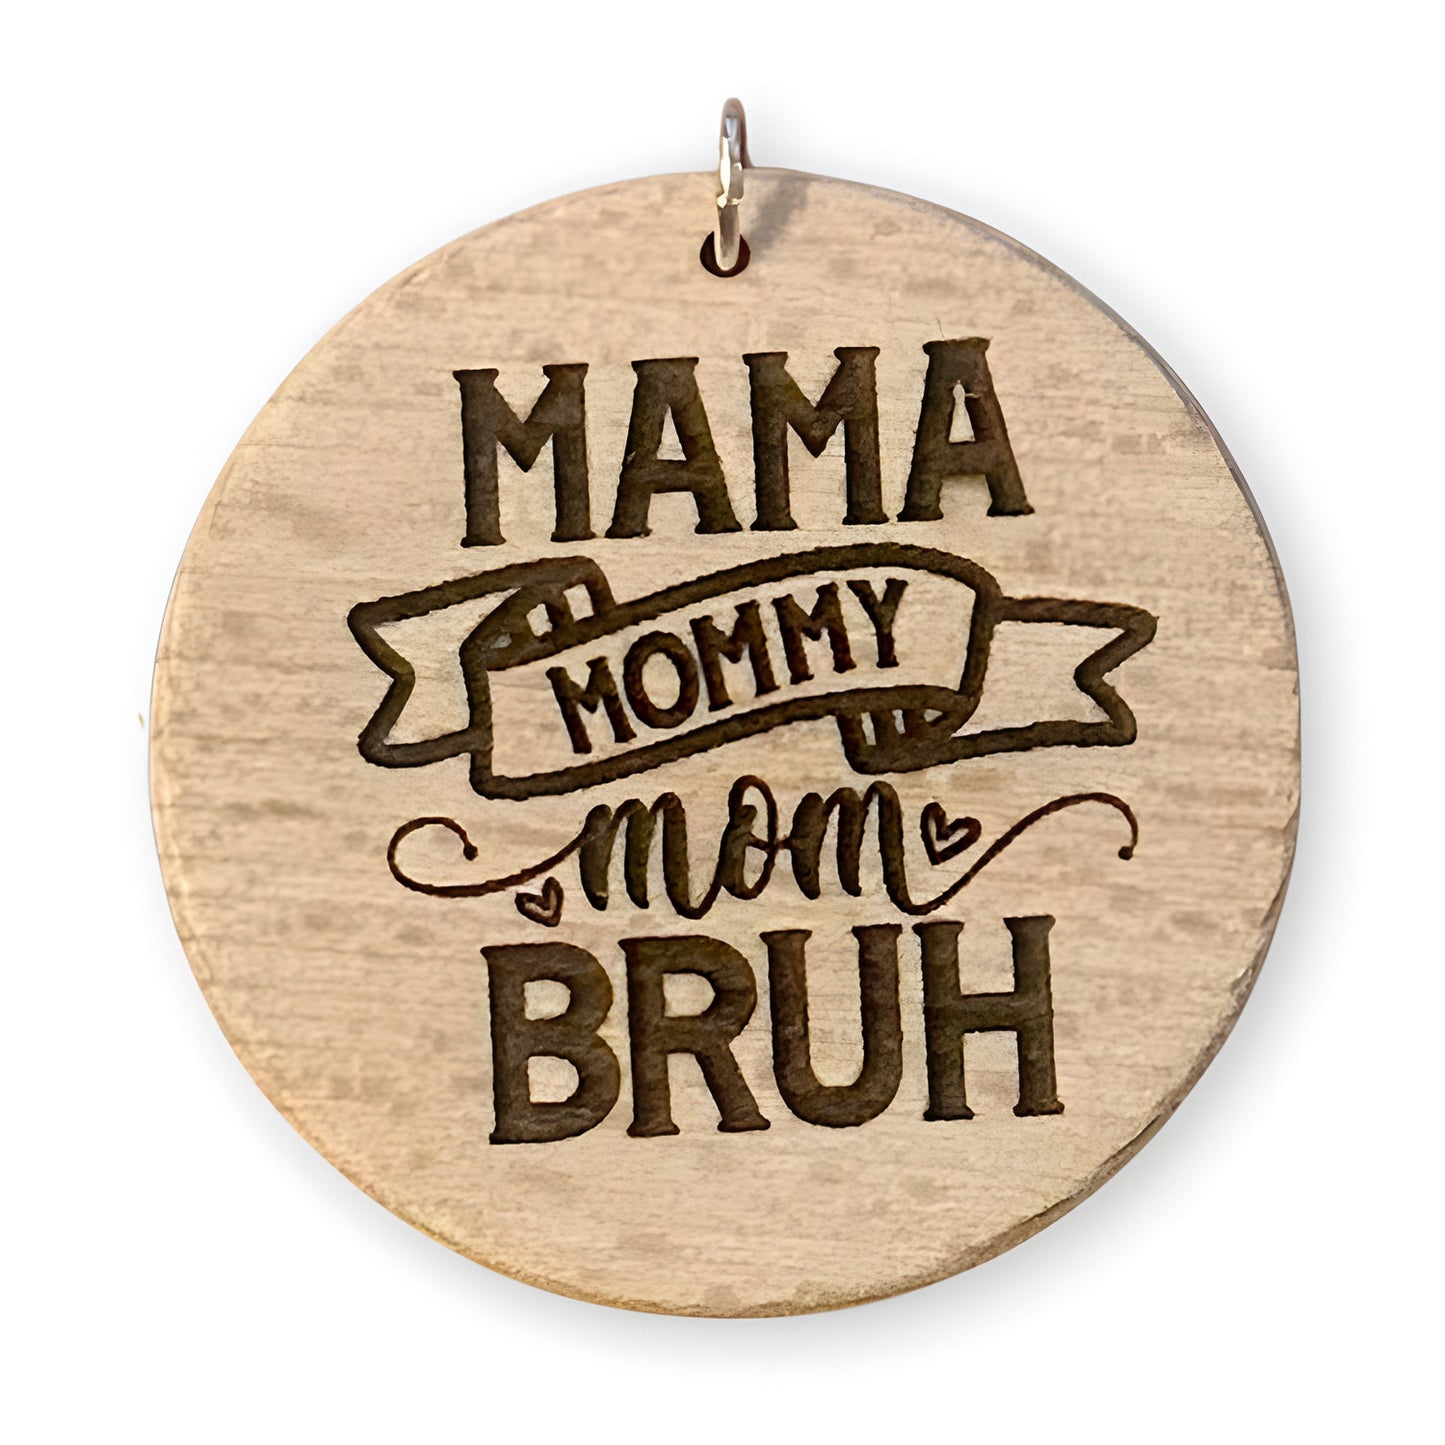 Witty Mom Wood Disc - "Mama Mommy Mom Bruh"